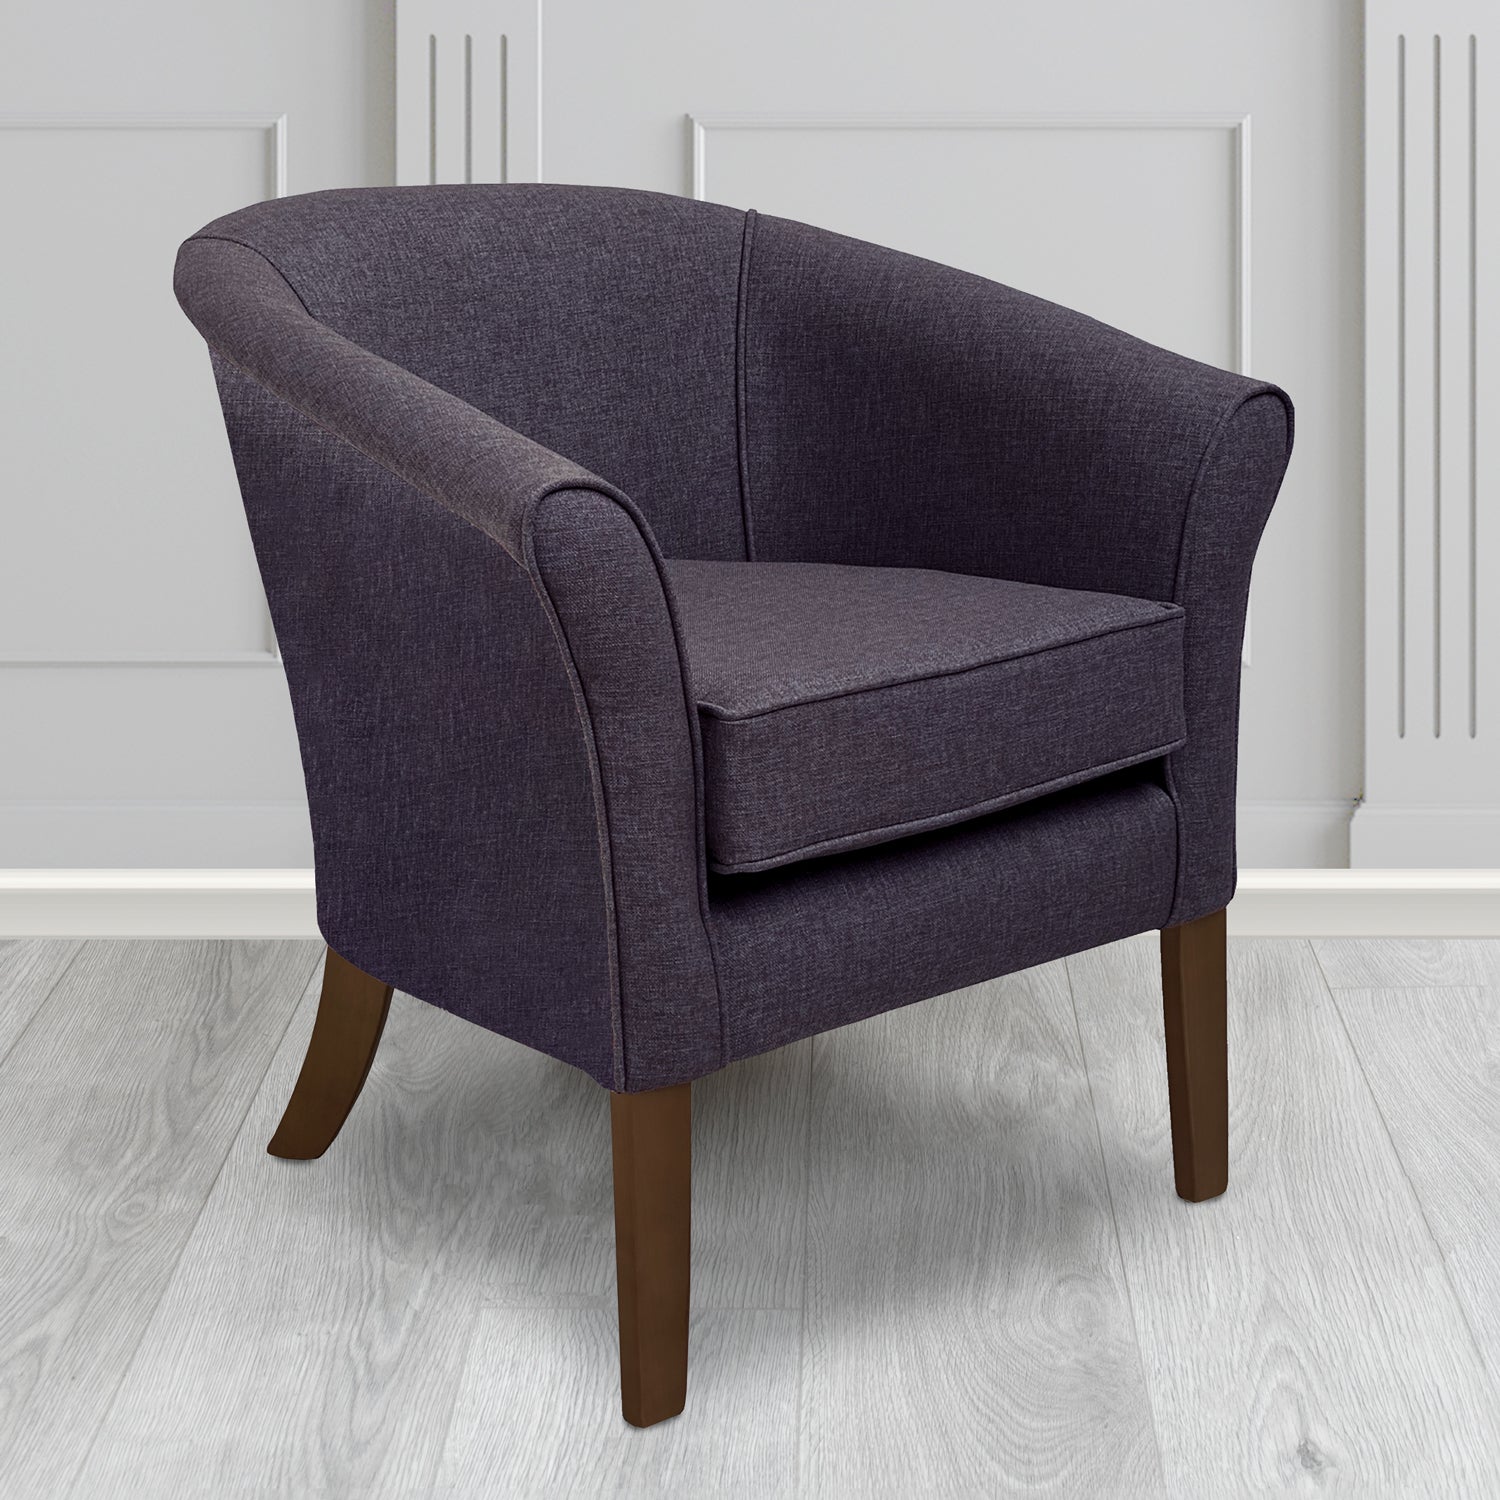 Aspen Tub Chair in Marna 481 Damson Crib 5 Fabric - Antimicrobial, Stain Resistant & Waterproof - The Tub Chair Shop